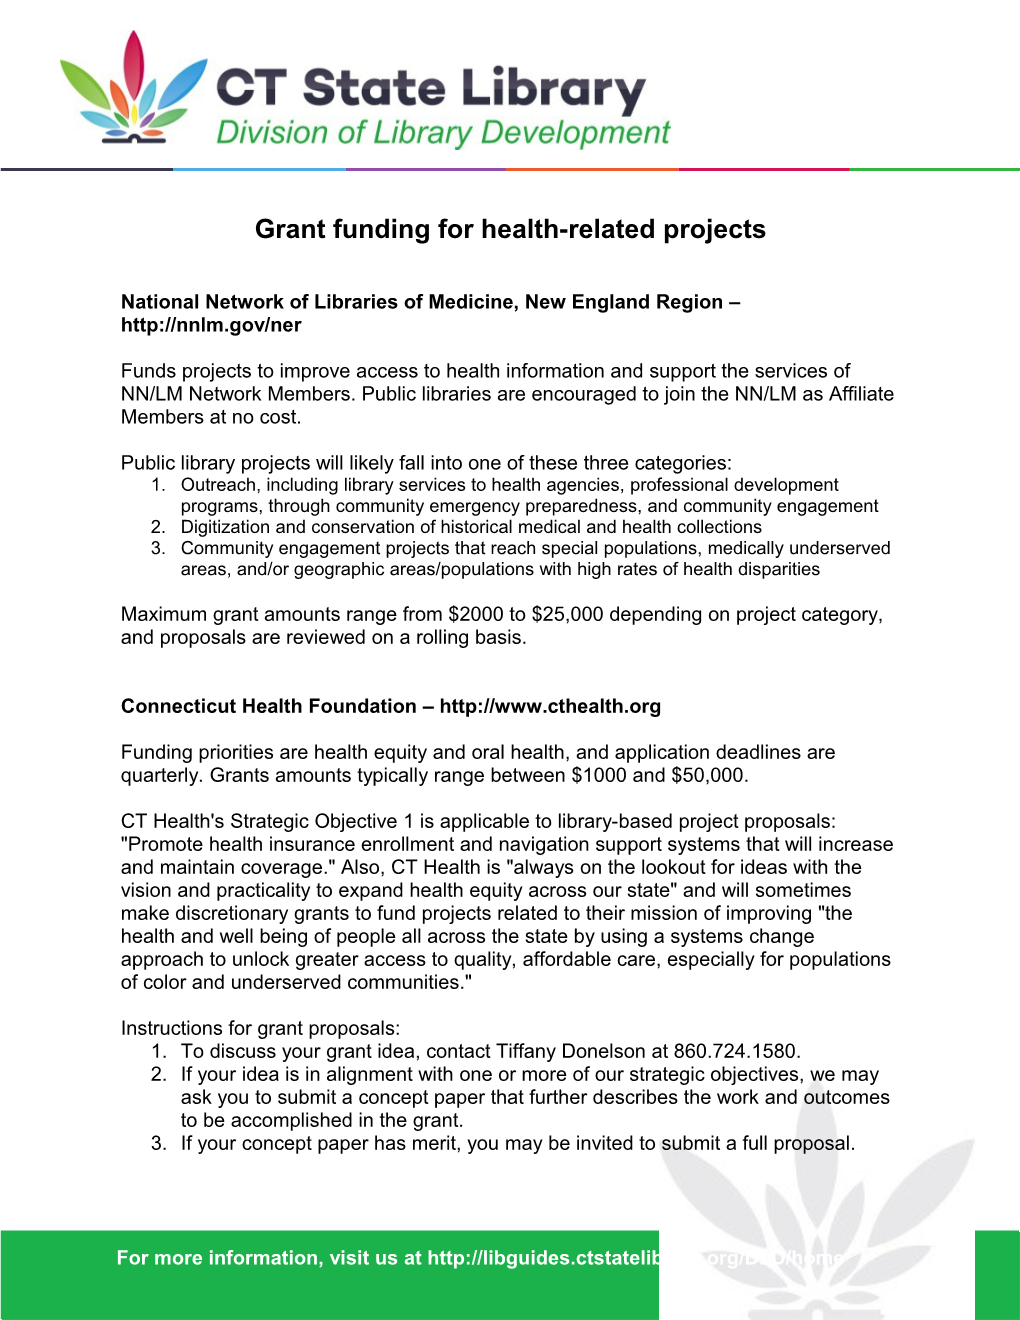 Grant Funding for Health-Related Projects